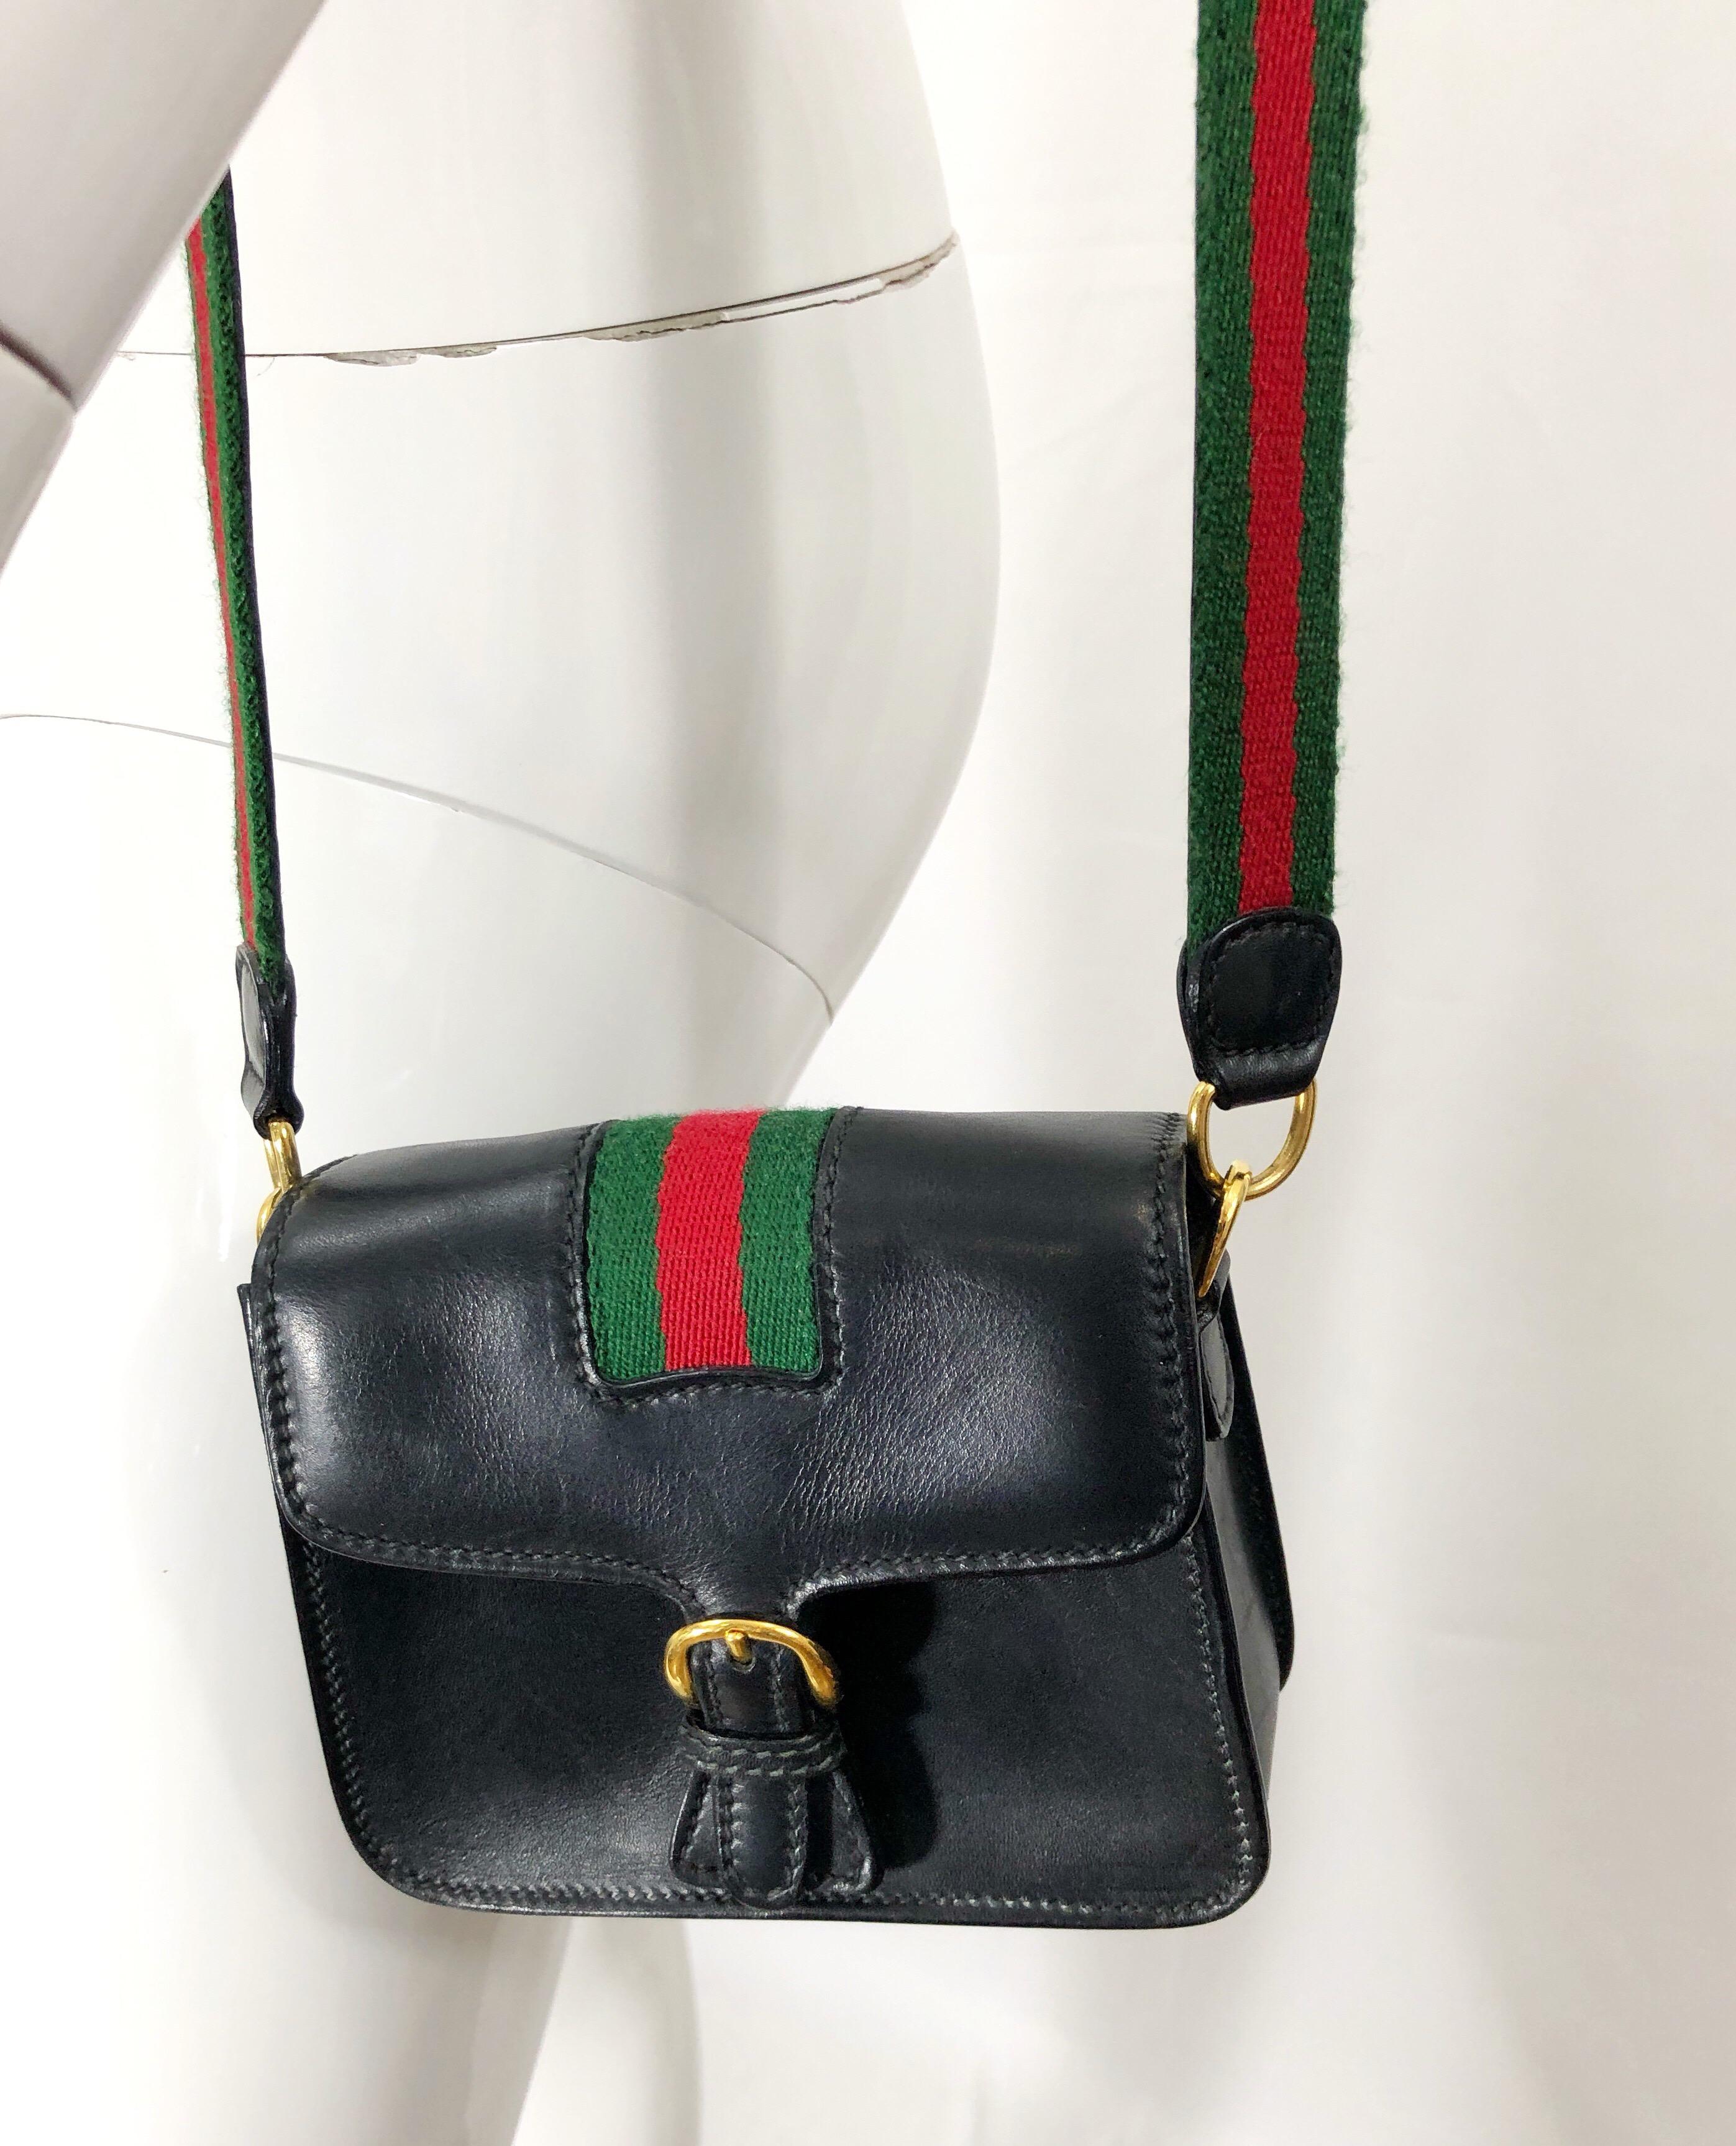 Rare vintage mid 90s GUCCI black leather miniature crossbody / shoulder bag! Features signature green and red striped cloth strap. Snaps shut with flap on front. Great for everyday use, or for evening. In godd condition, with wear to the lining,